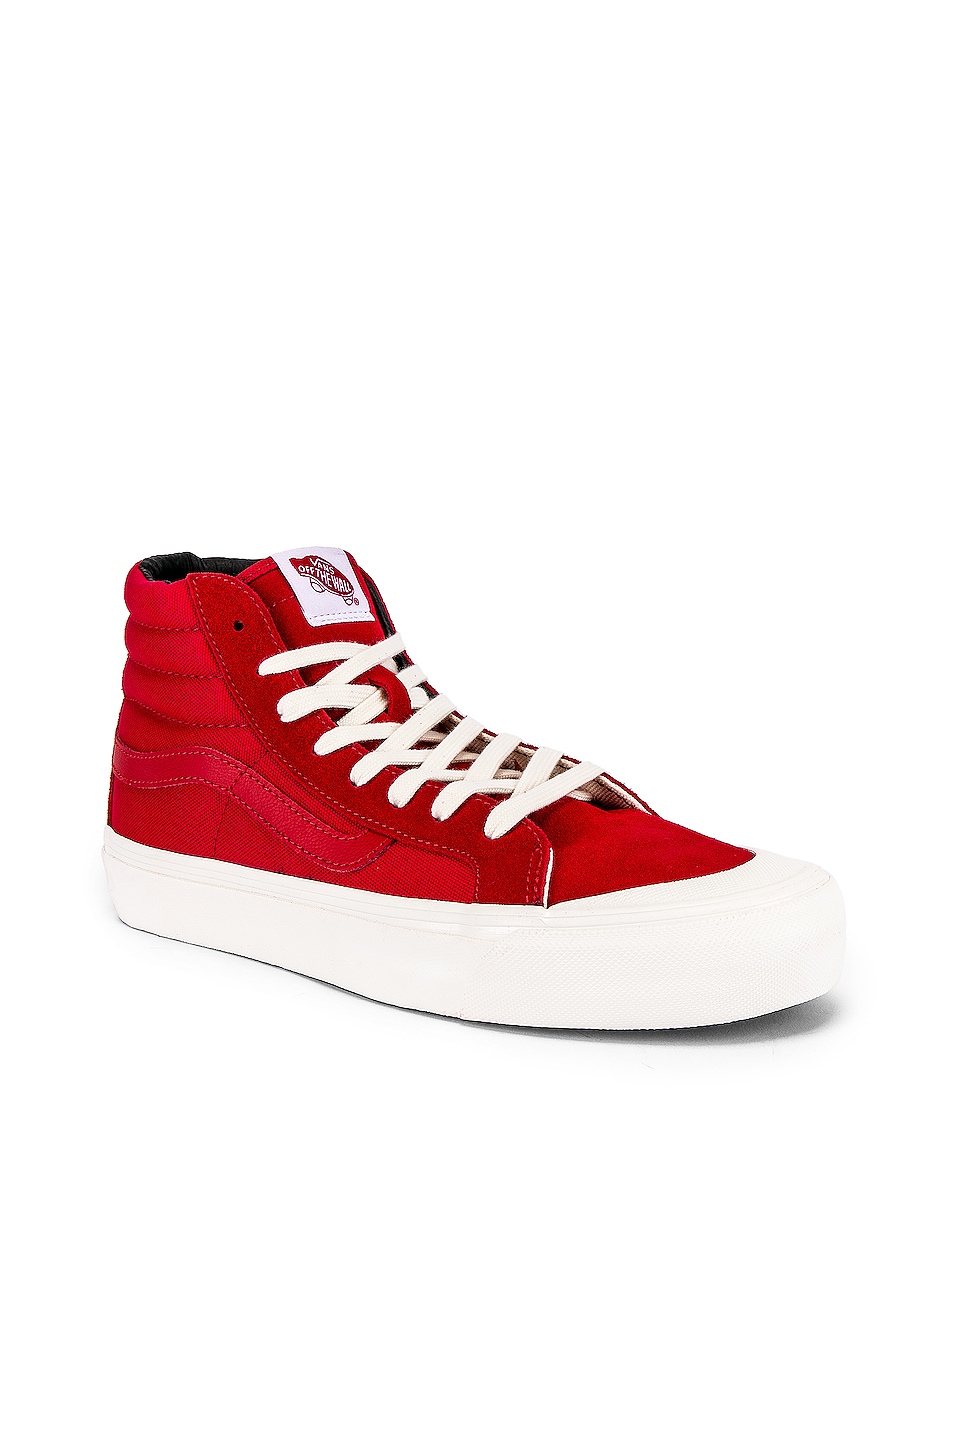 tight A faithful Sanders Vans Vault OG Style 138 LX in Racing Red & Checkerboard | FWRD